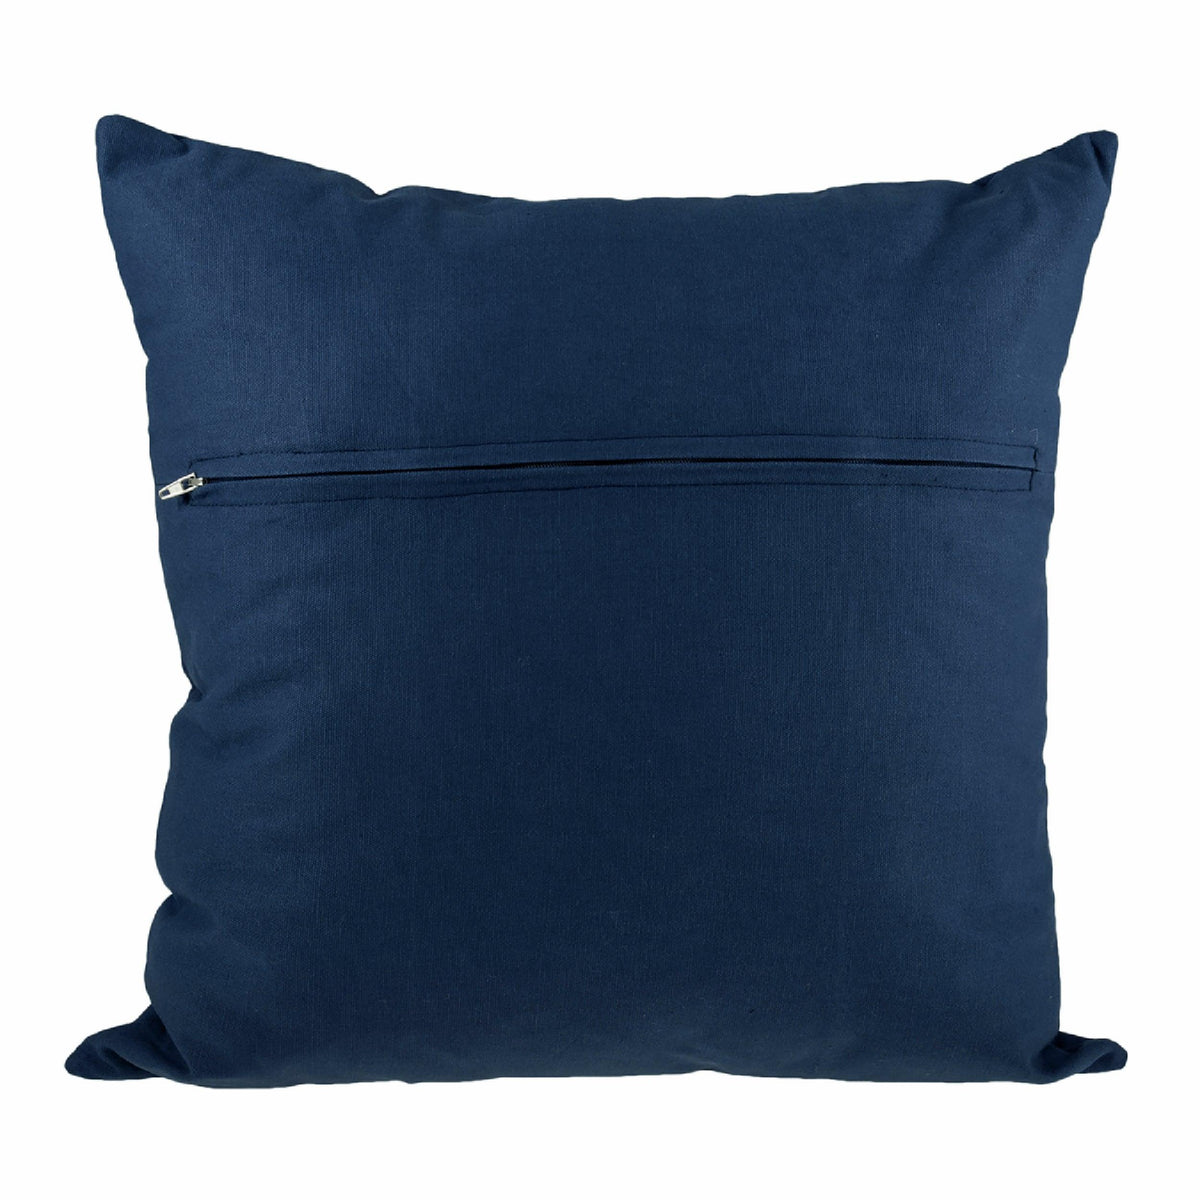 Thea Gouverneur Cushion Back Kit with Zipper - Navy Blue - For any 16x16 Inch (40x40cm) Cushion- Cross Stitch Creations - Embroidery - 23.5902 - Thea Gouverneur Since 1959